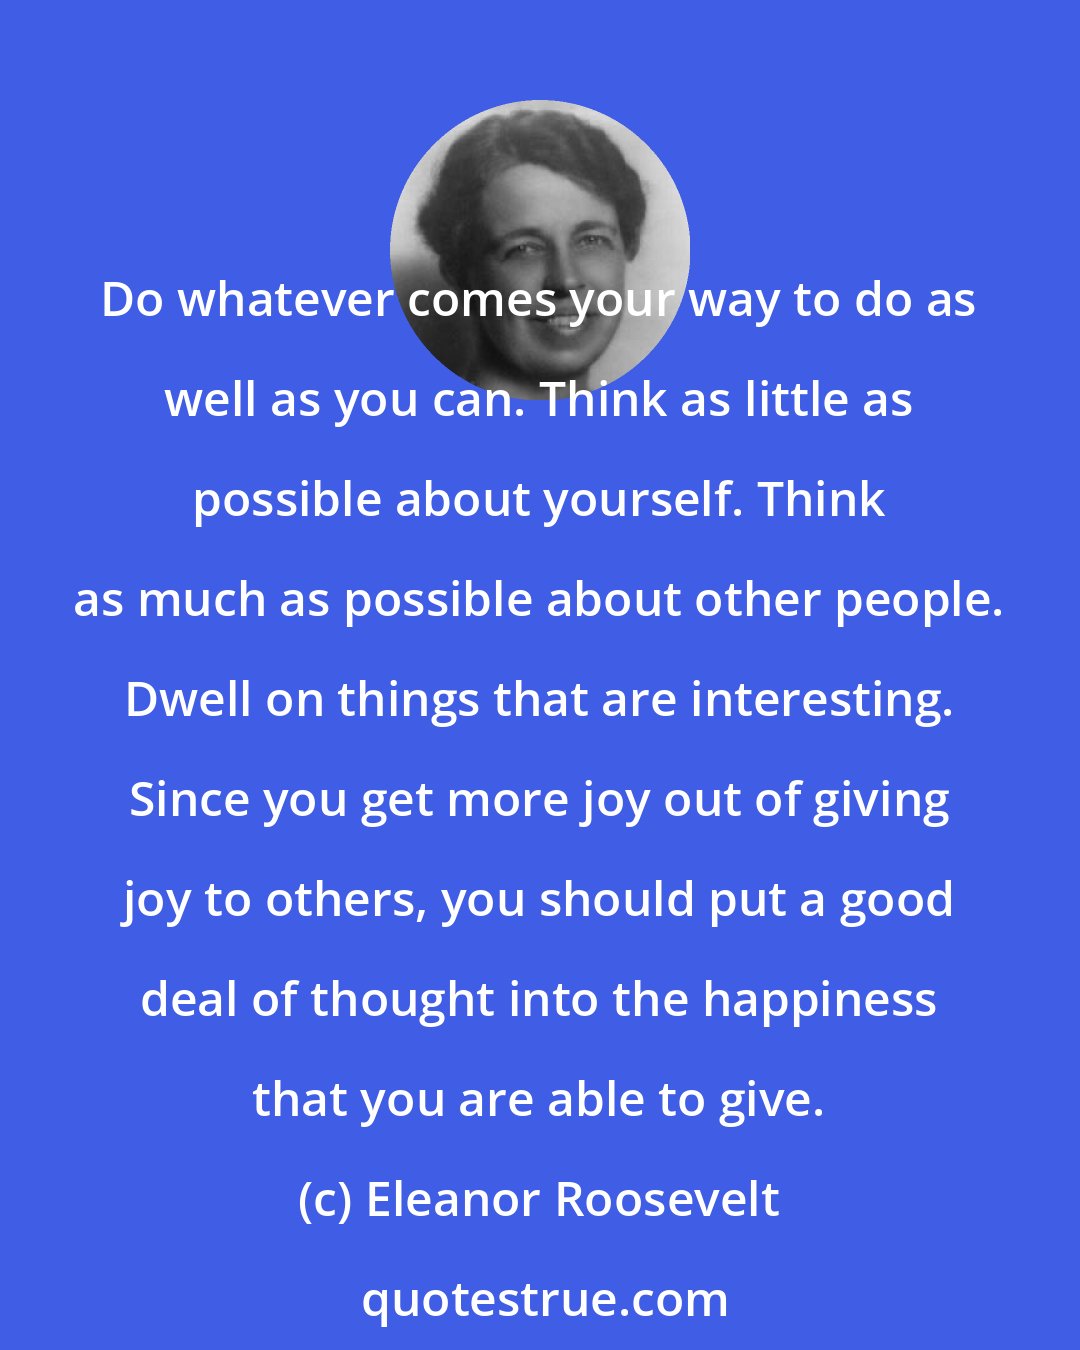 Eleanor Roosevelt: Do whatever comes your way to do as well as you can. Think as little as possible about yourself. Think as much as possible about other people. Dwell on things that are interesting. Since you get more joy out of giving joy to others, you should put a good deal of thought into the happiness that you are able to give.